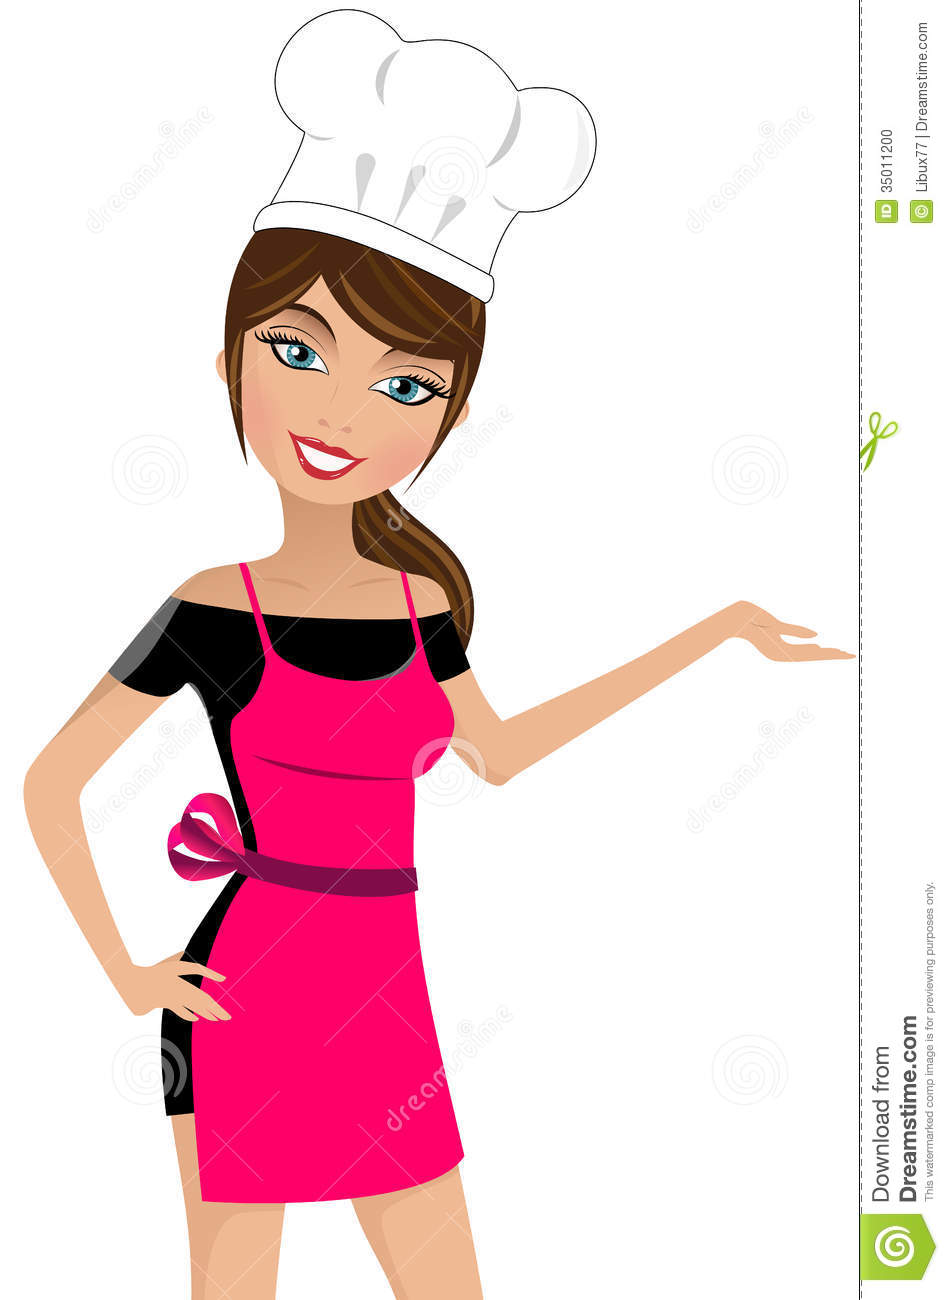 Illustration Of A Beautiful Smiling Woman Chef Presenting Inviting Or